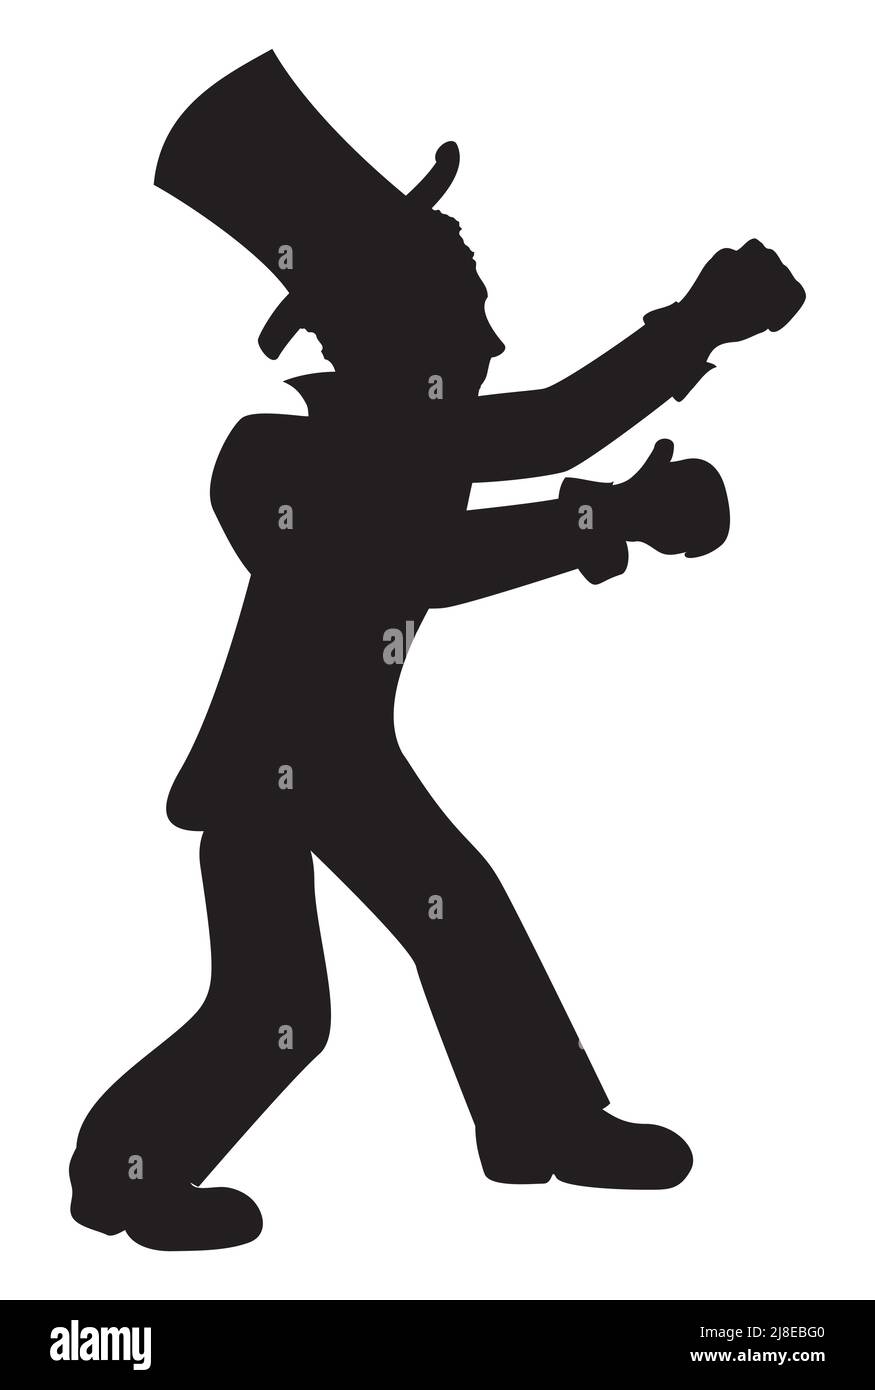 Elegant black gentleman's silhouette, raising his fist, wearing a top hat and boxer gloves. Stock Vector